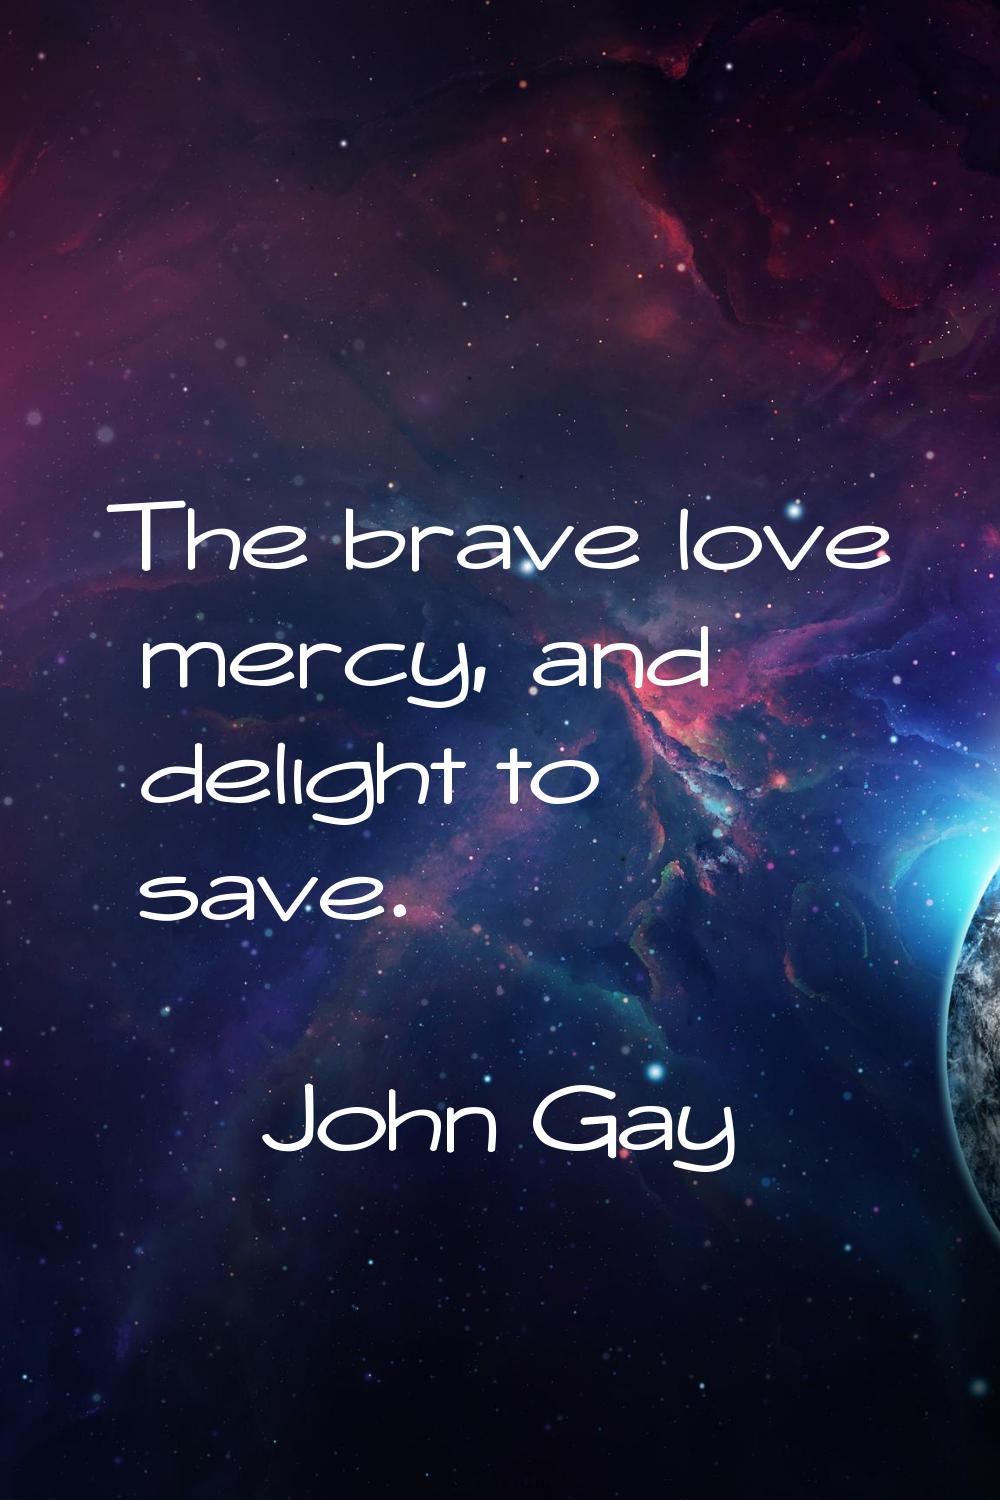 The brave love mercy, and delight to save.